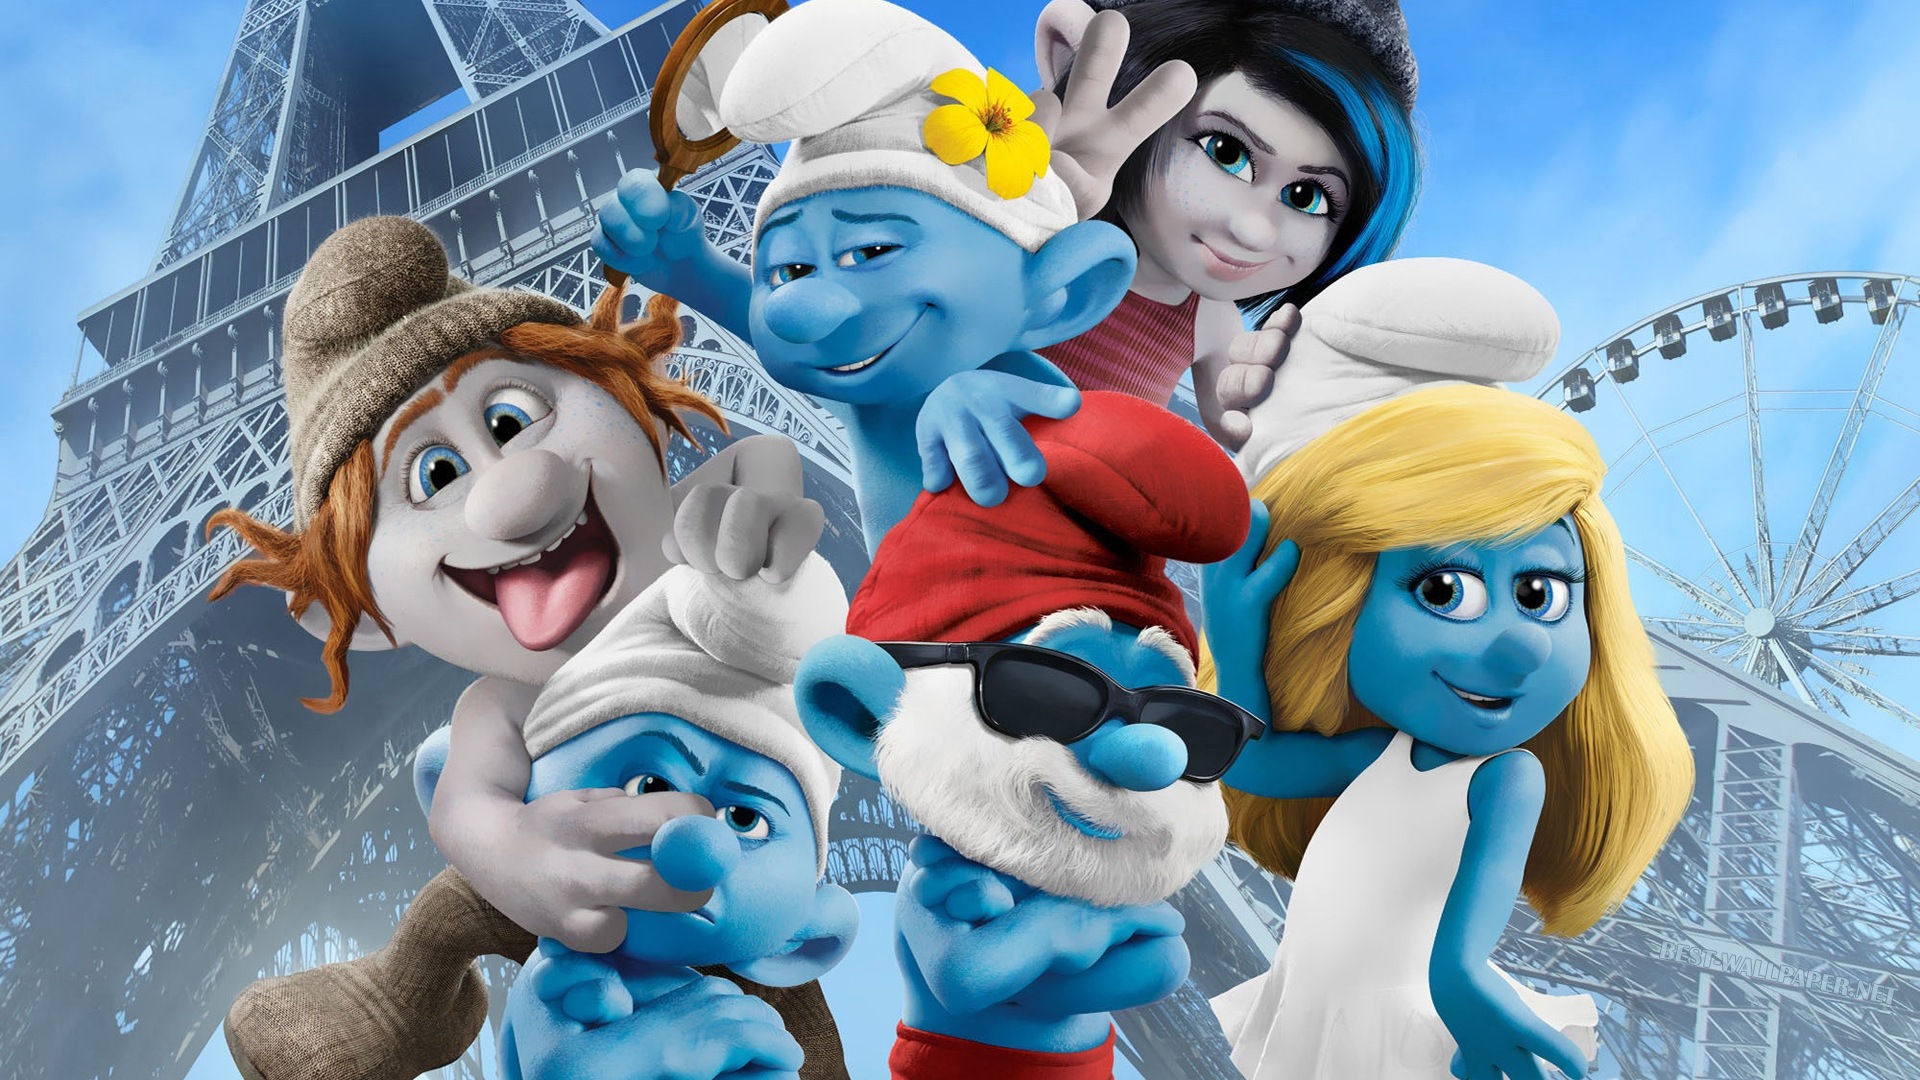 The Smurfs 2 HD movie wallpapers #7 - 1920x1080